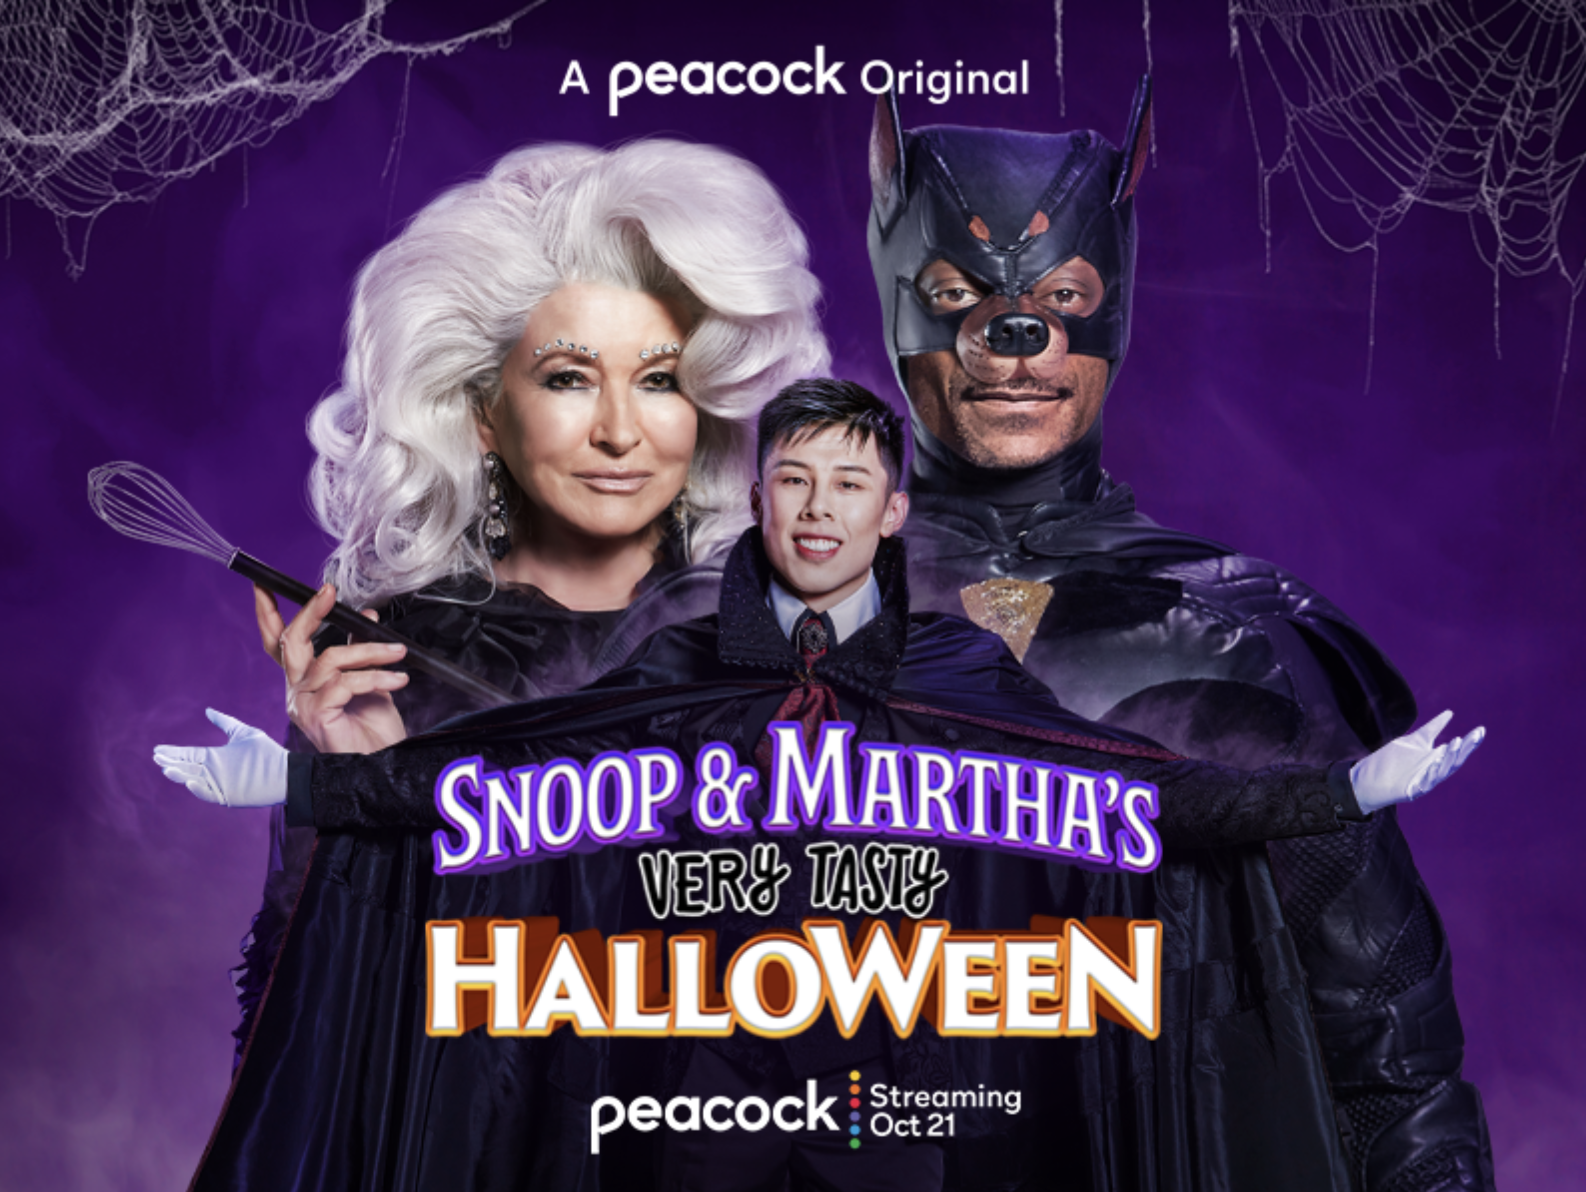 A promo photo of Snoop Dog and Martha Stewart in Halloween costumes